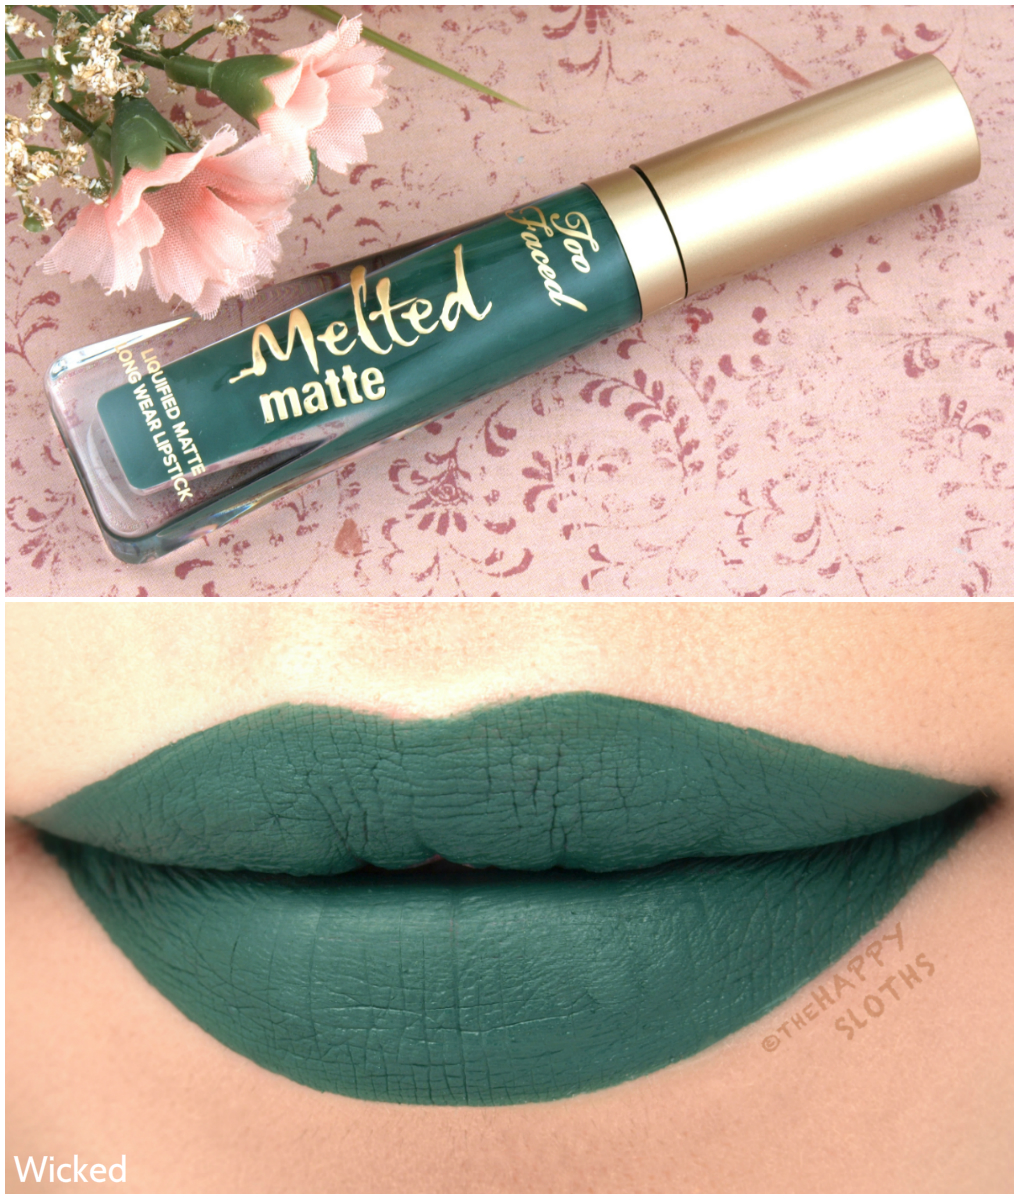 Too Faced Melted Matte Liquified Matte in "Wicked": Review and Swatches